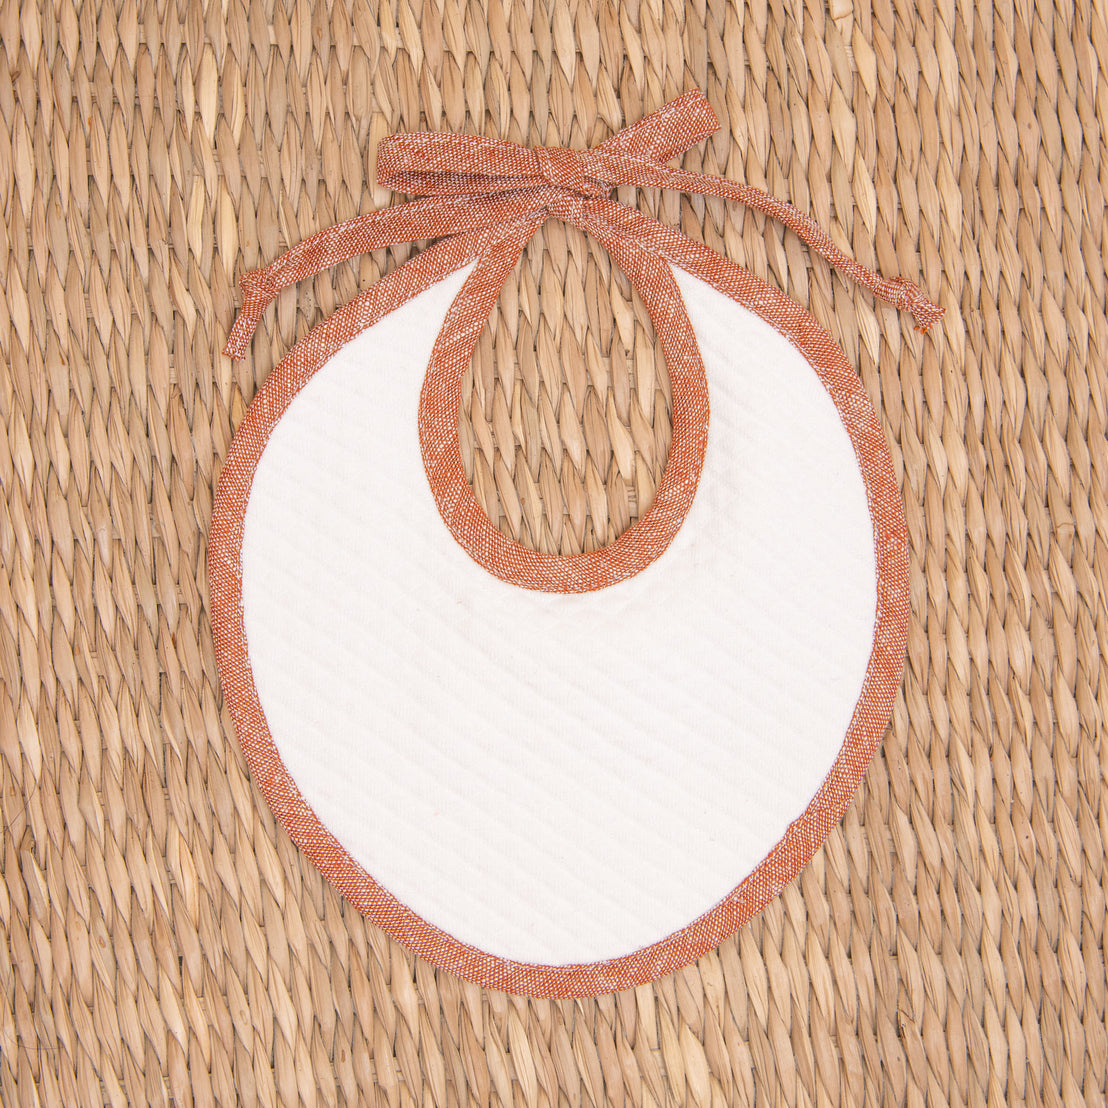 Flat lay photo of the red Silas Linen Trim Bib. The bib is made from textured cotton in light ivory